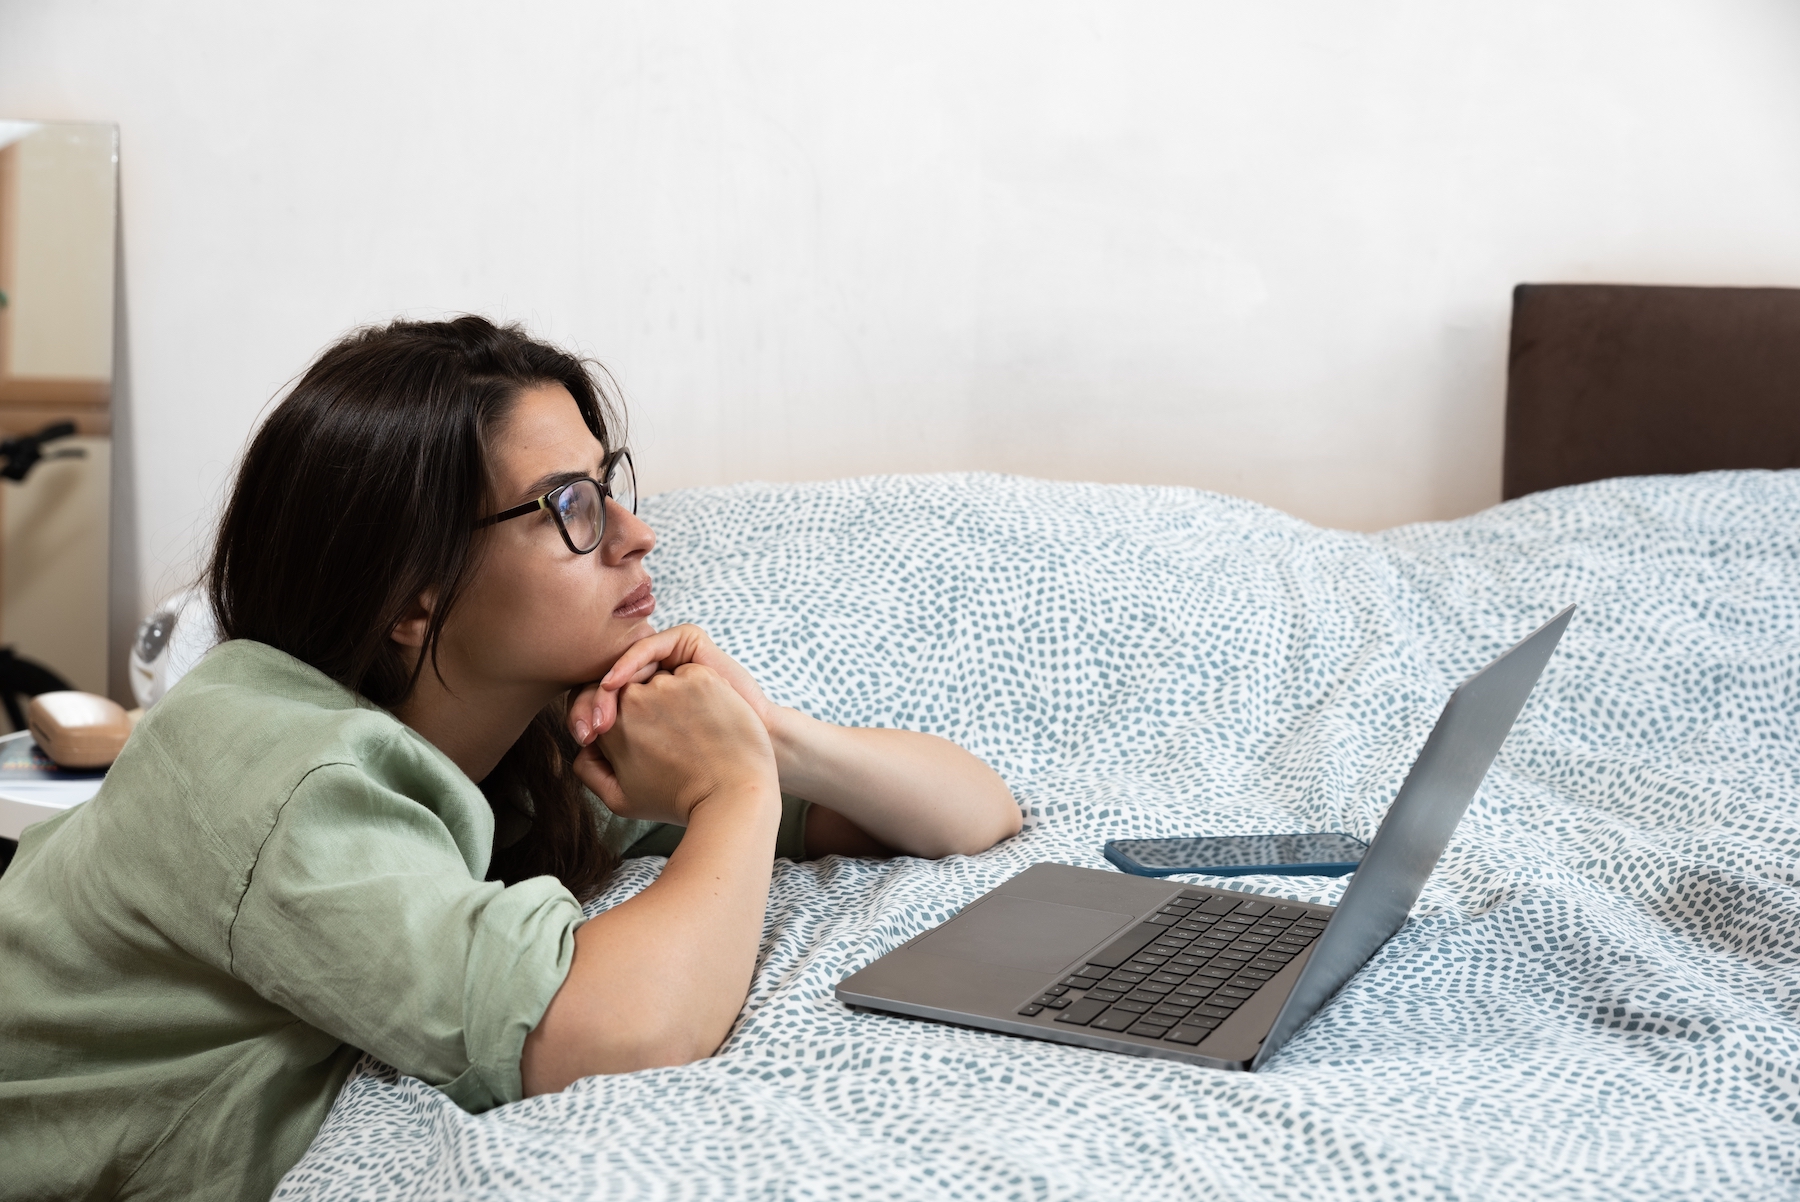 A young woman looking at her laptop on her bed.